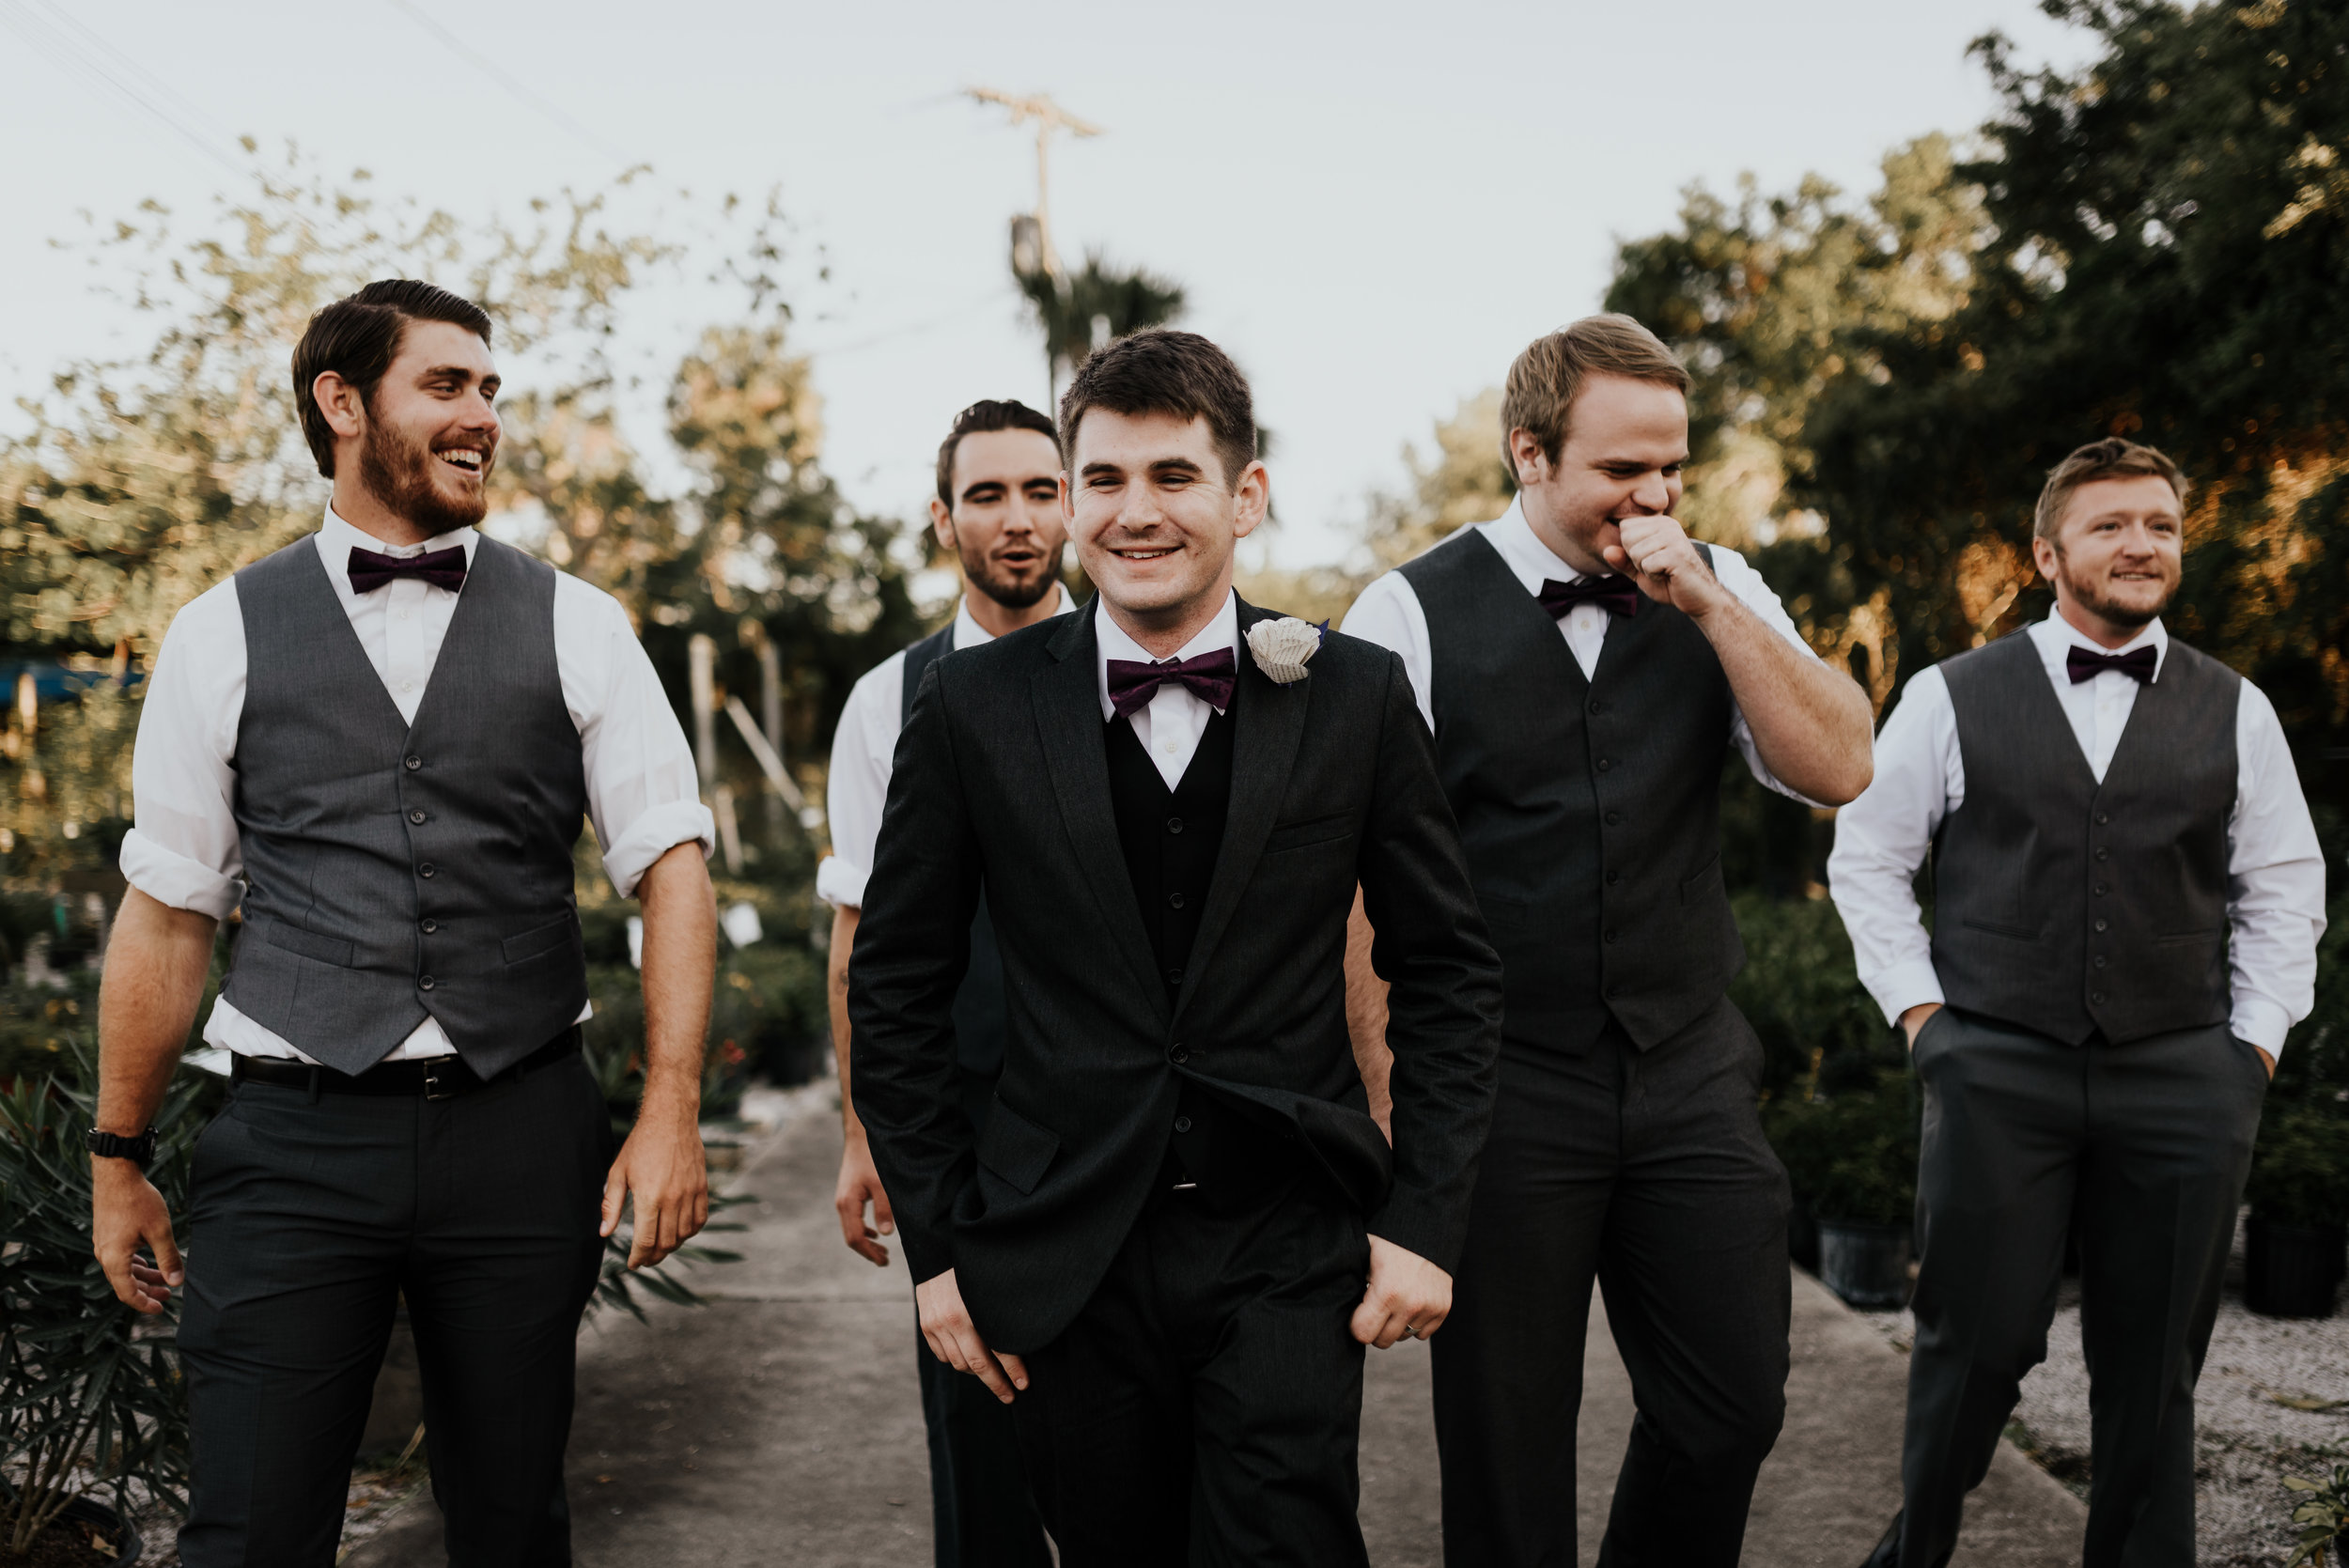 Groomsmen, bridal party photos, whimsical wedding, garden wedding, Rockledge Gardens wedding, wedding photography